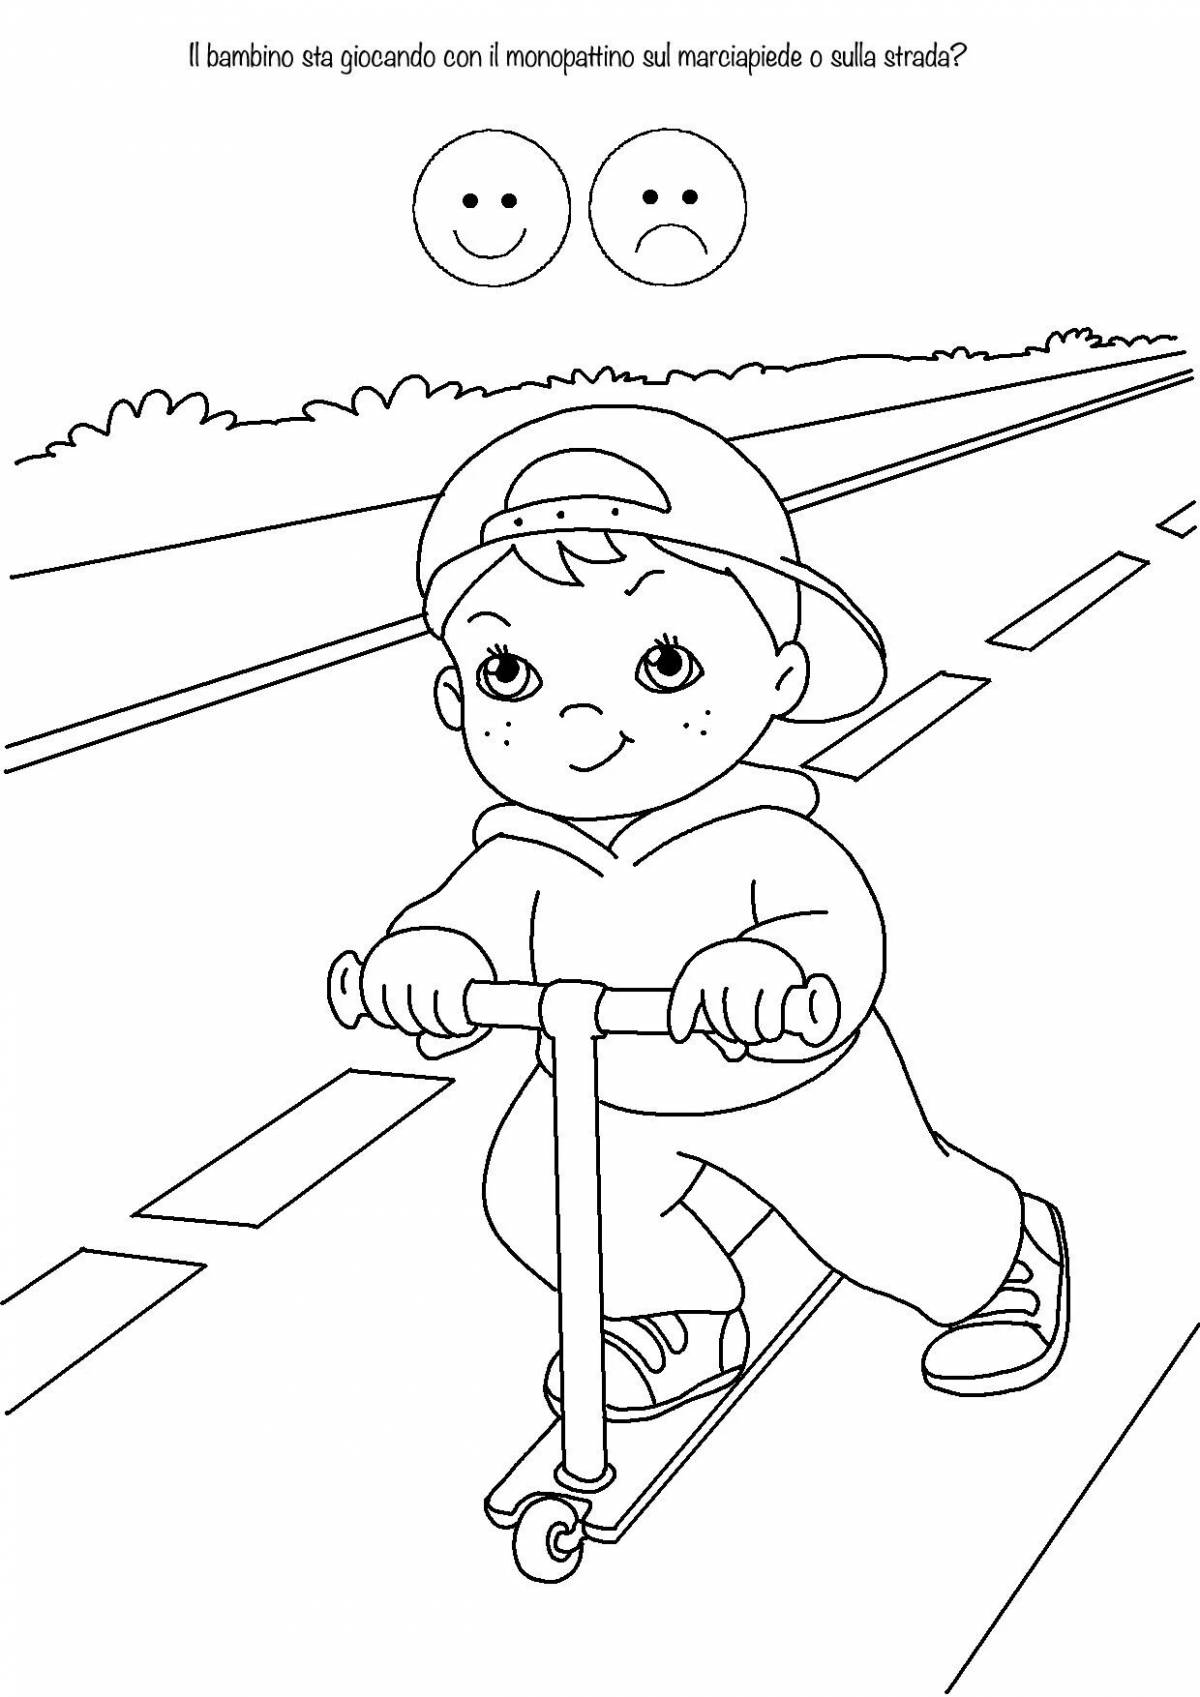 Rail safety education coloring page